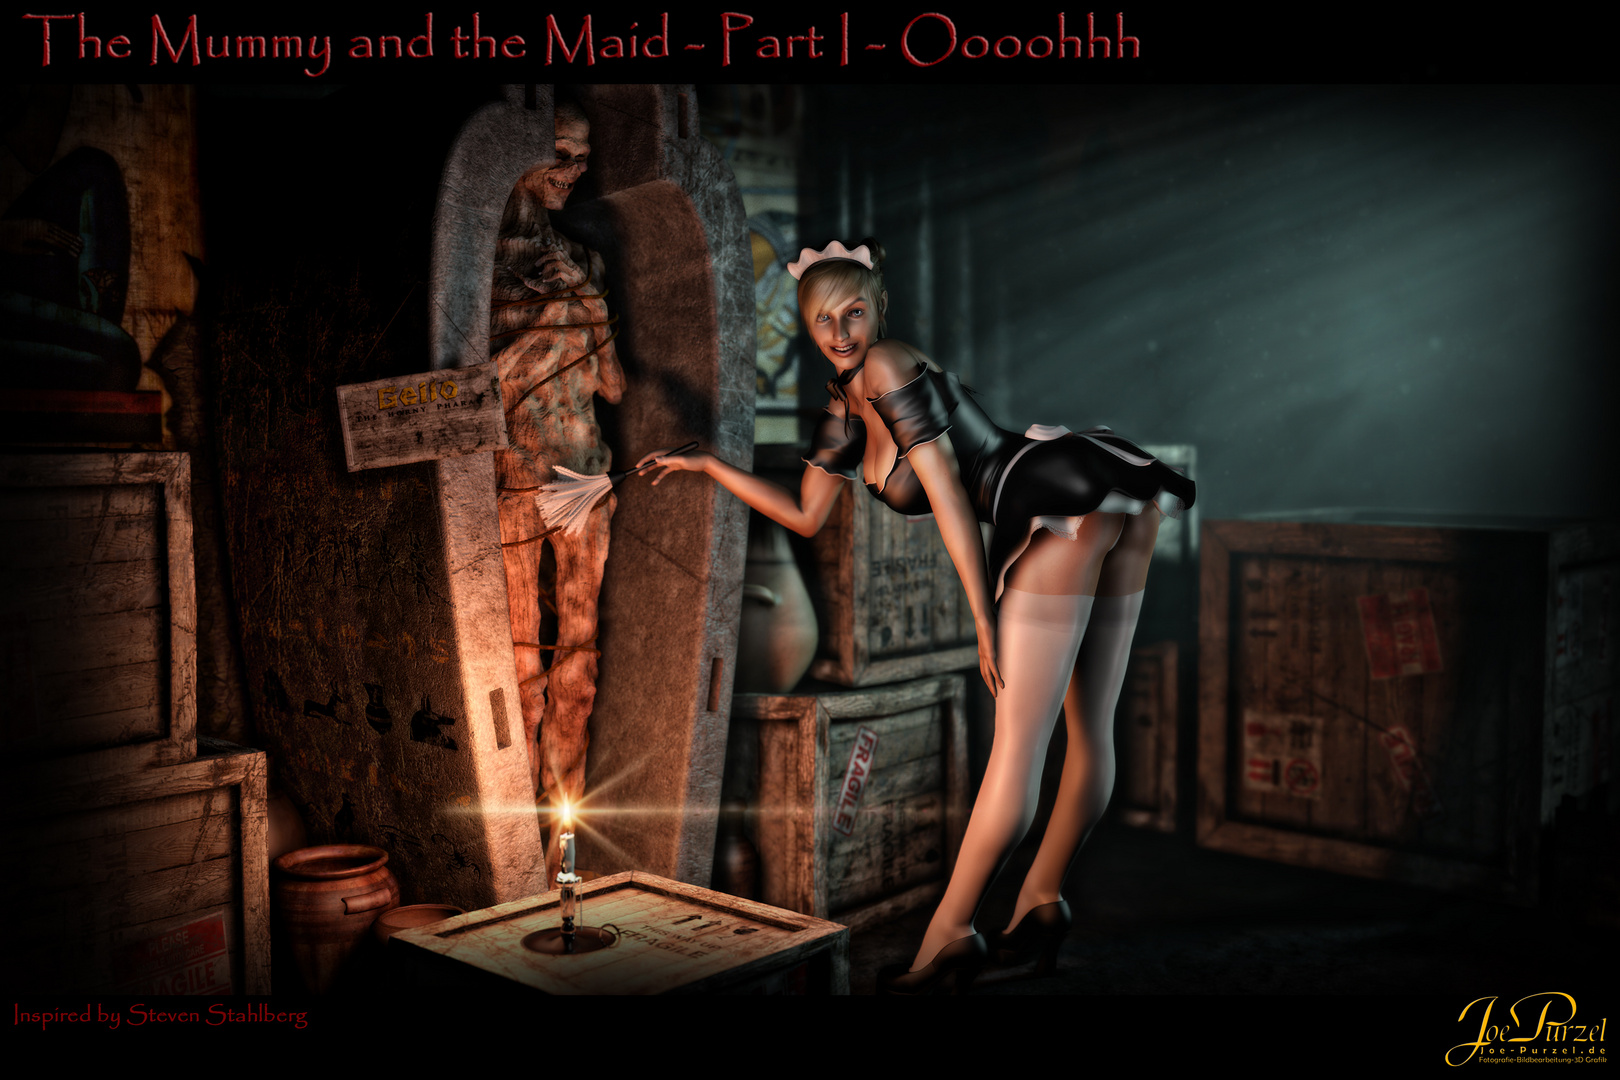 The Mummy and the Maid Part I